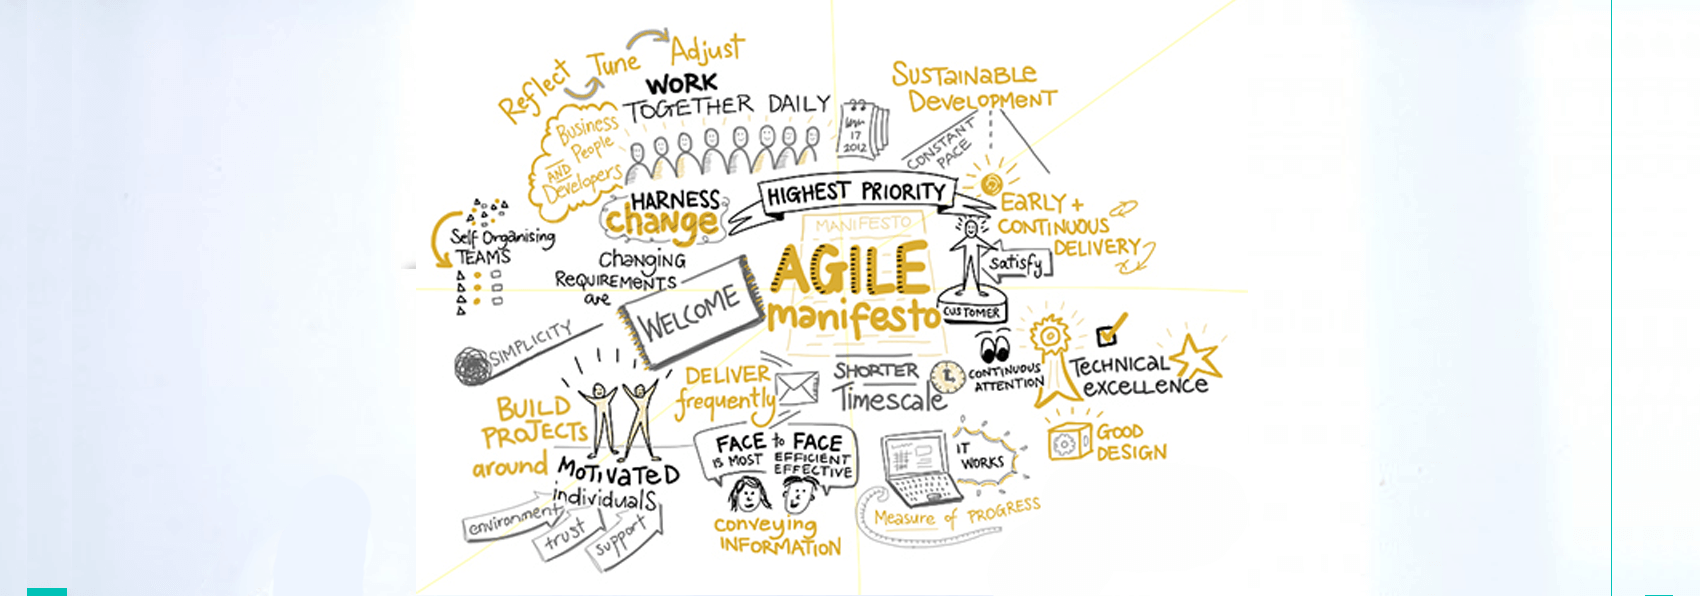 Agile Best Practices? You must be kidding!